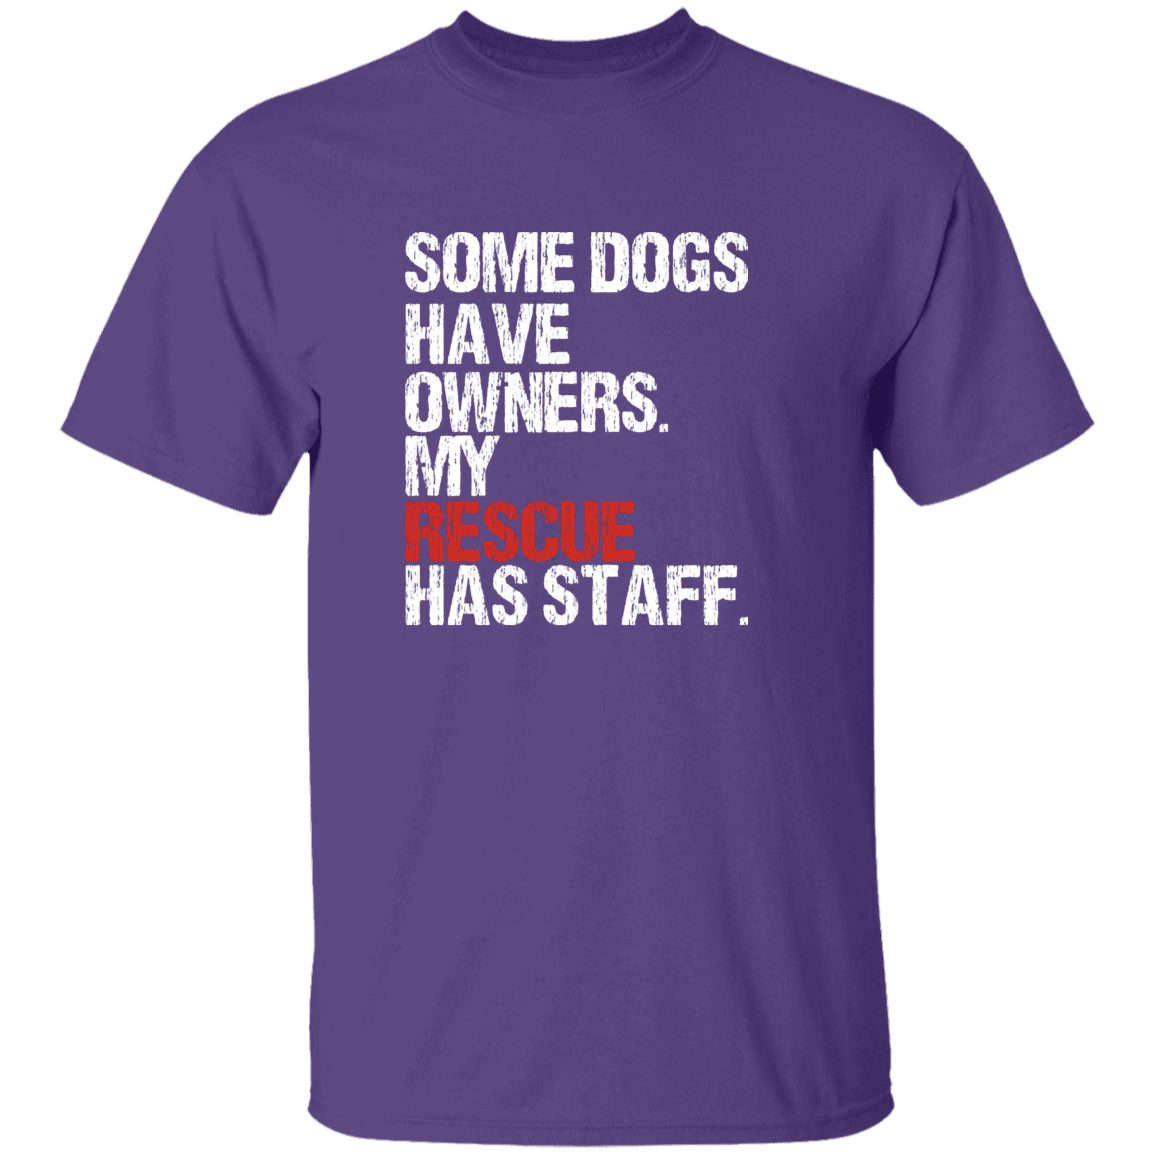 Some Dogs Have Owners - T Shirt.